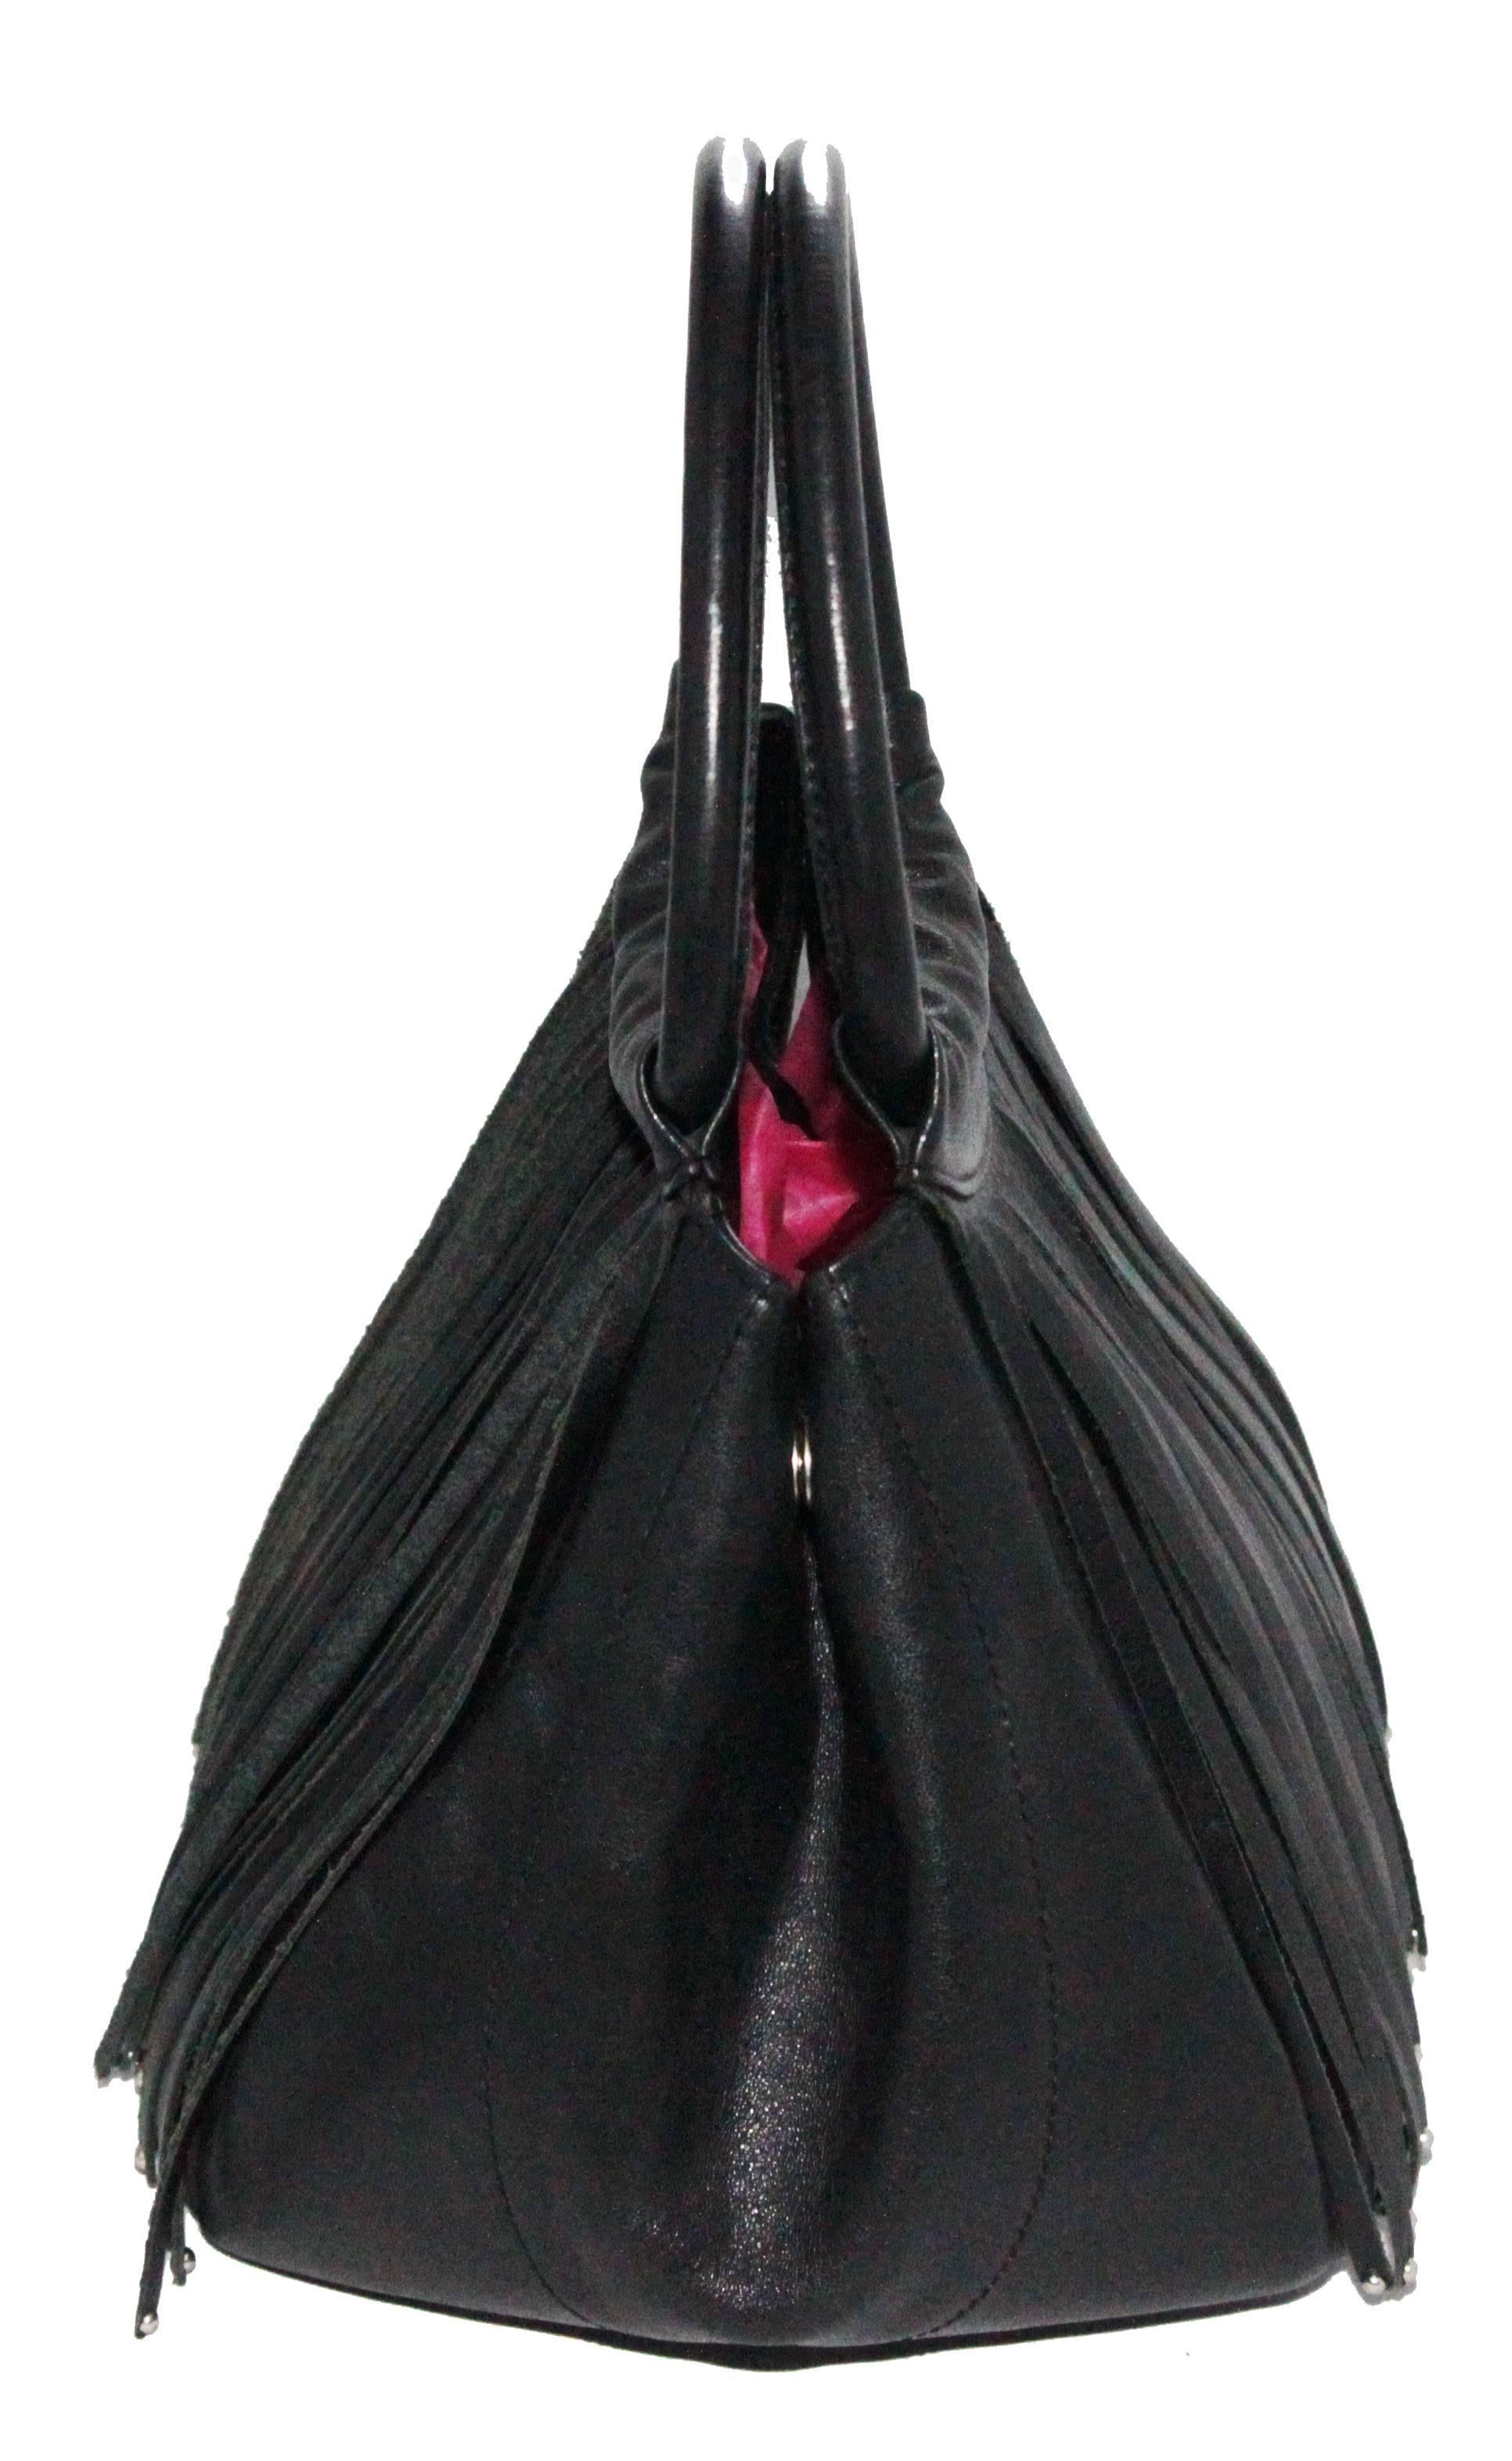 Fringes? Yes, but vintage! Look at this unusual Charles Jourdan black fringes handbag of the early 90s. Made of calf leather & fabric lining. 

Size: 24.5 x 19.5 x 17.5 cm

Marked: Charles Jourdan 

Excellent condition. 